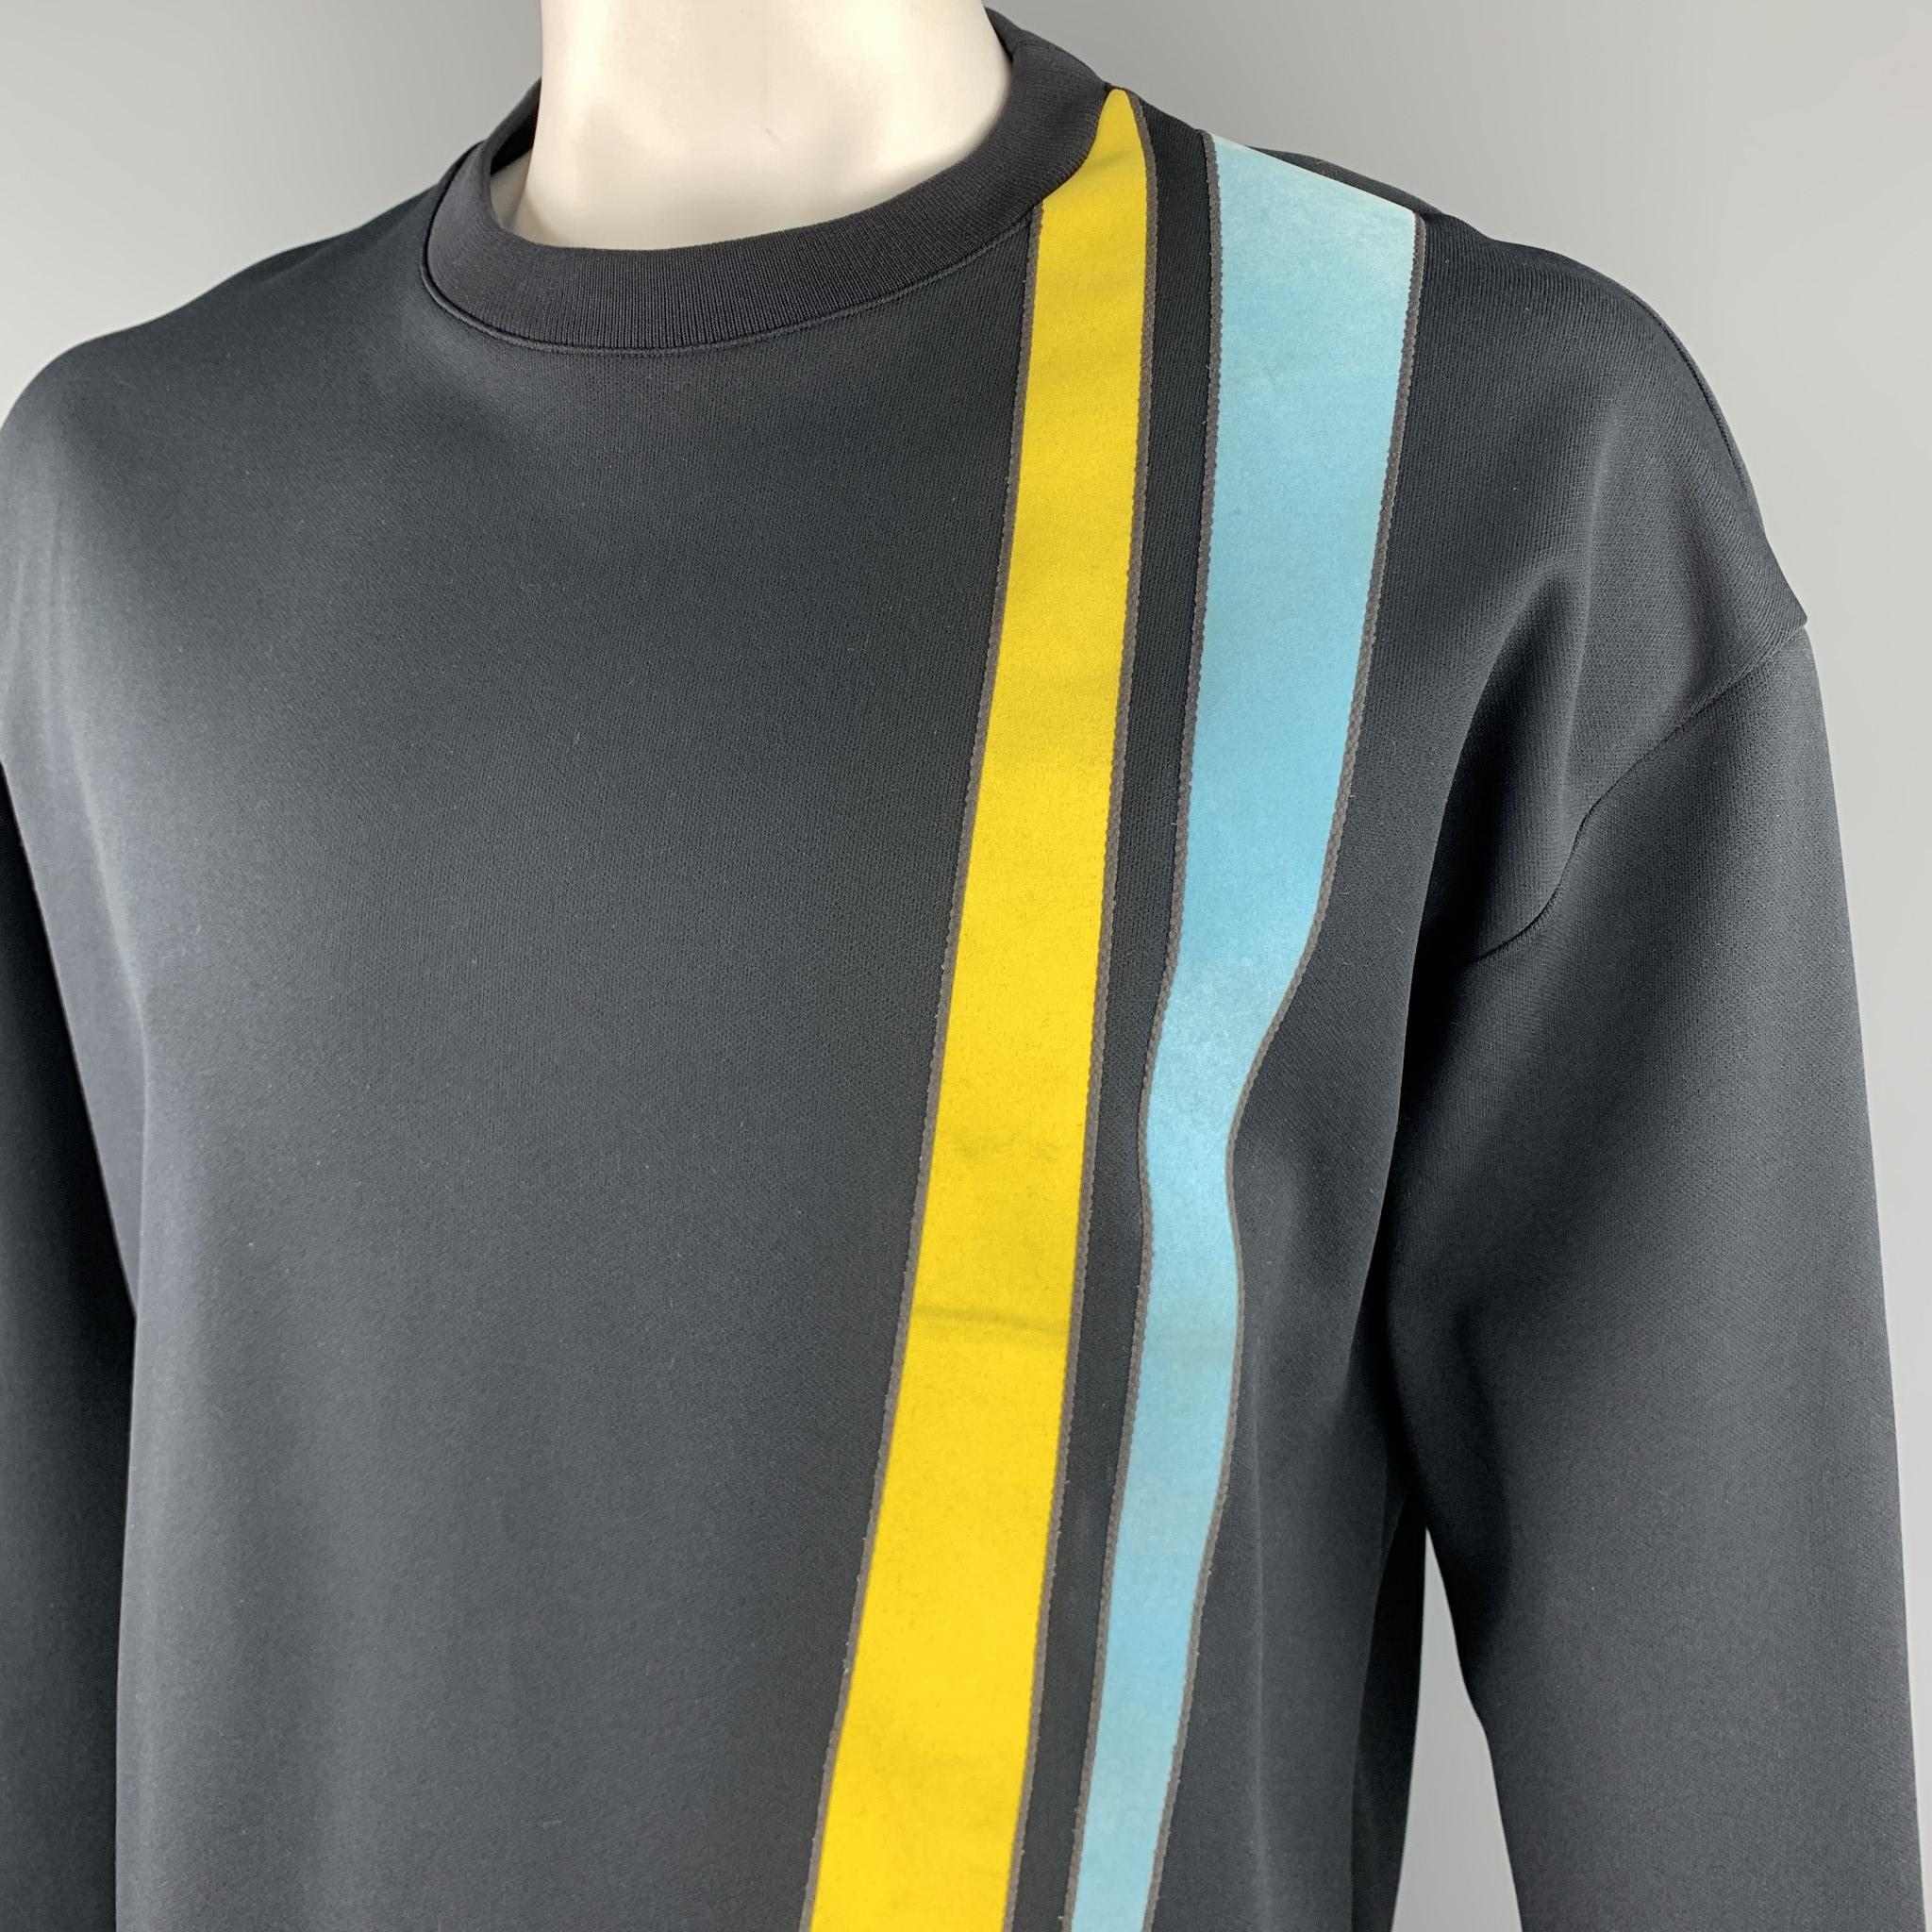 JIL SANDER pullover comes in a structured knit with a round neckline and light blue and yellow velvet textured stripe patches. Minor wear on accents. As-is. Made in Italy.

Very Good Pre-Owned Condition.
Marked: XL

Measurements:

Shoulder: 25